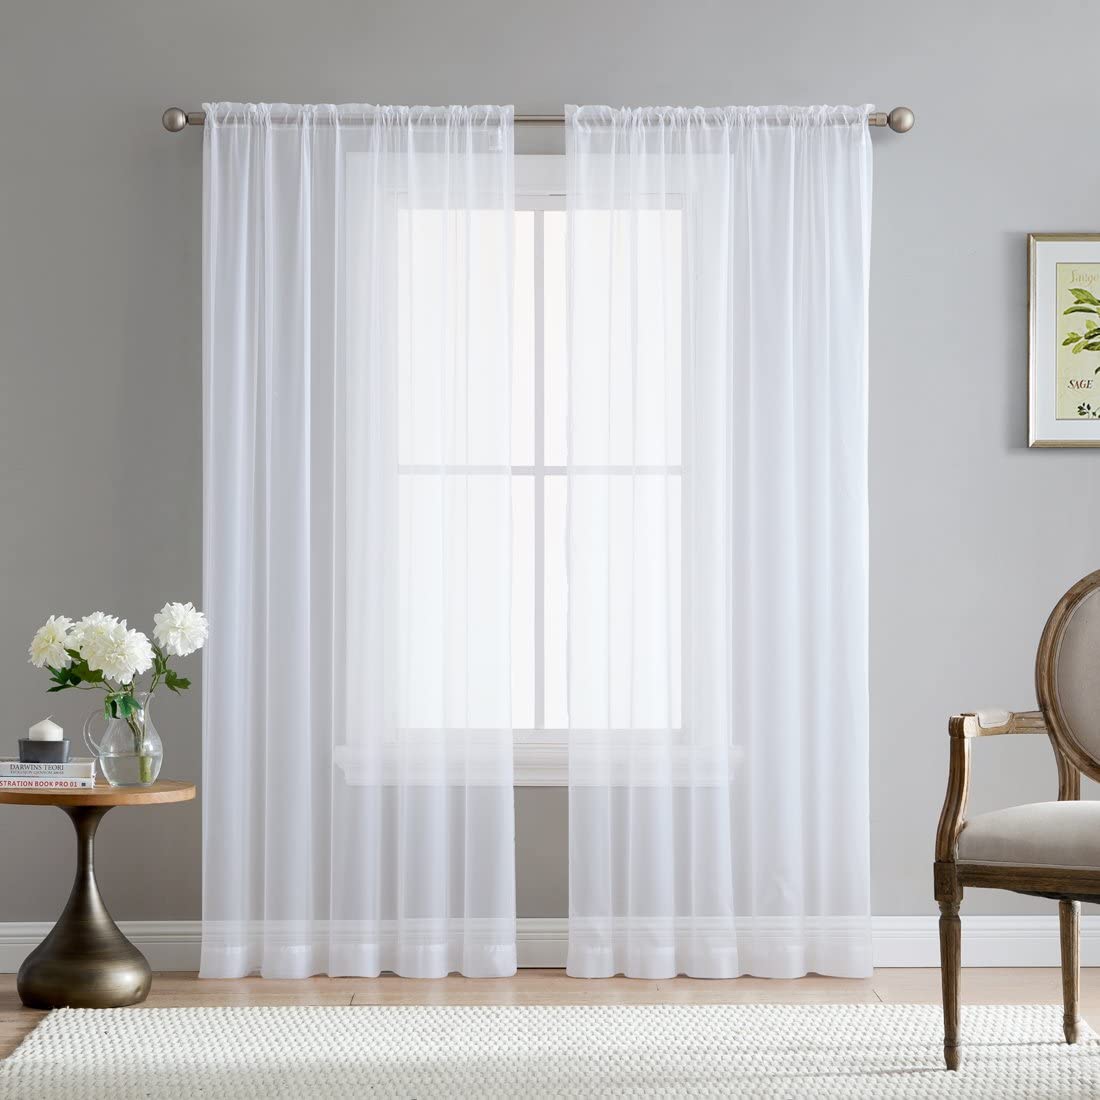 HLC.ME Machine Washable Sheer Curtains, 2-Pack